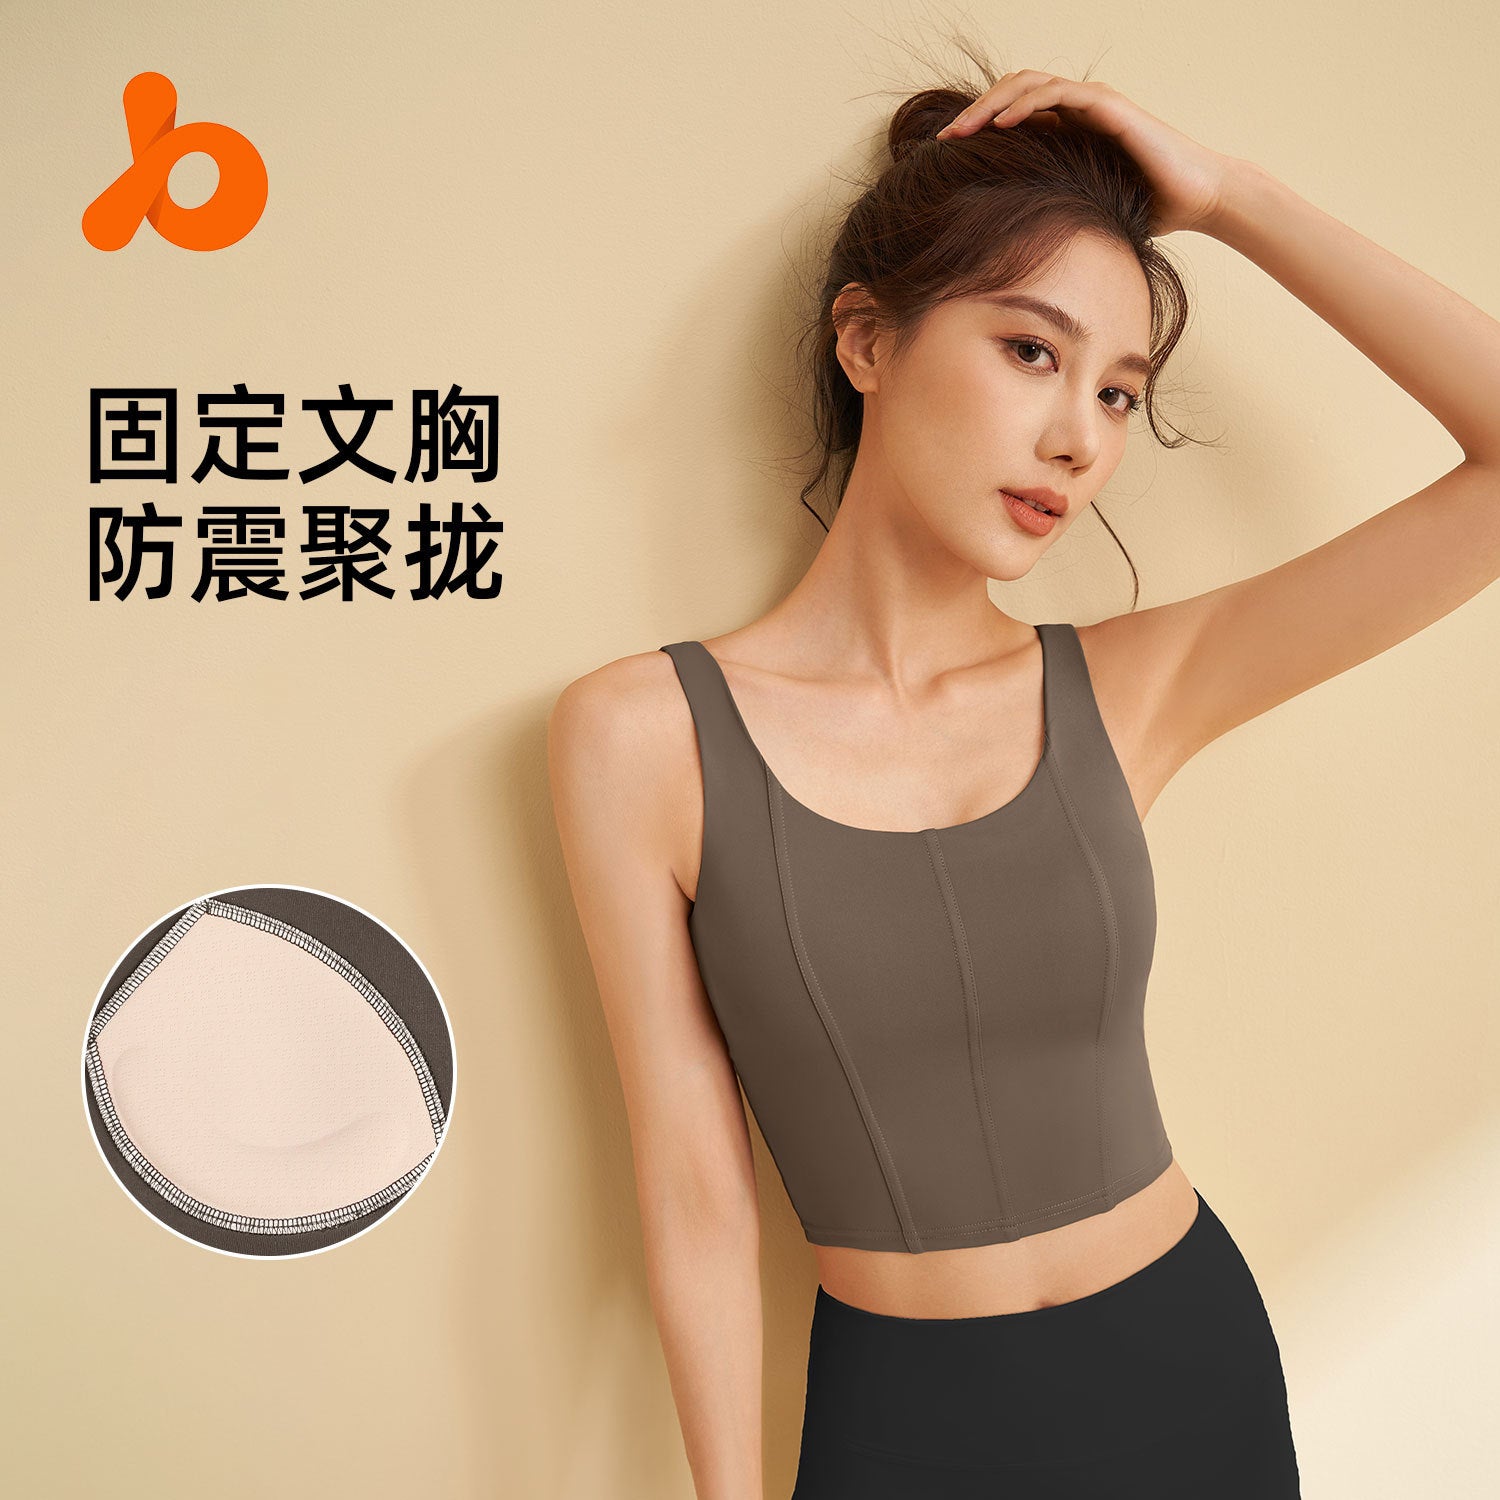 Juyitang new tight-fitting sports bra high-strength shock-proof sports bra quick-drying yoga fitness vest female